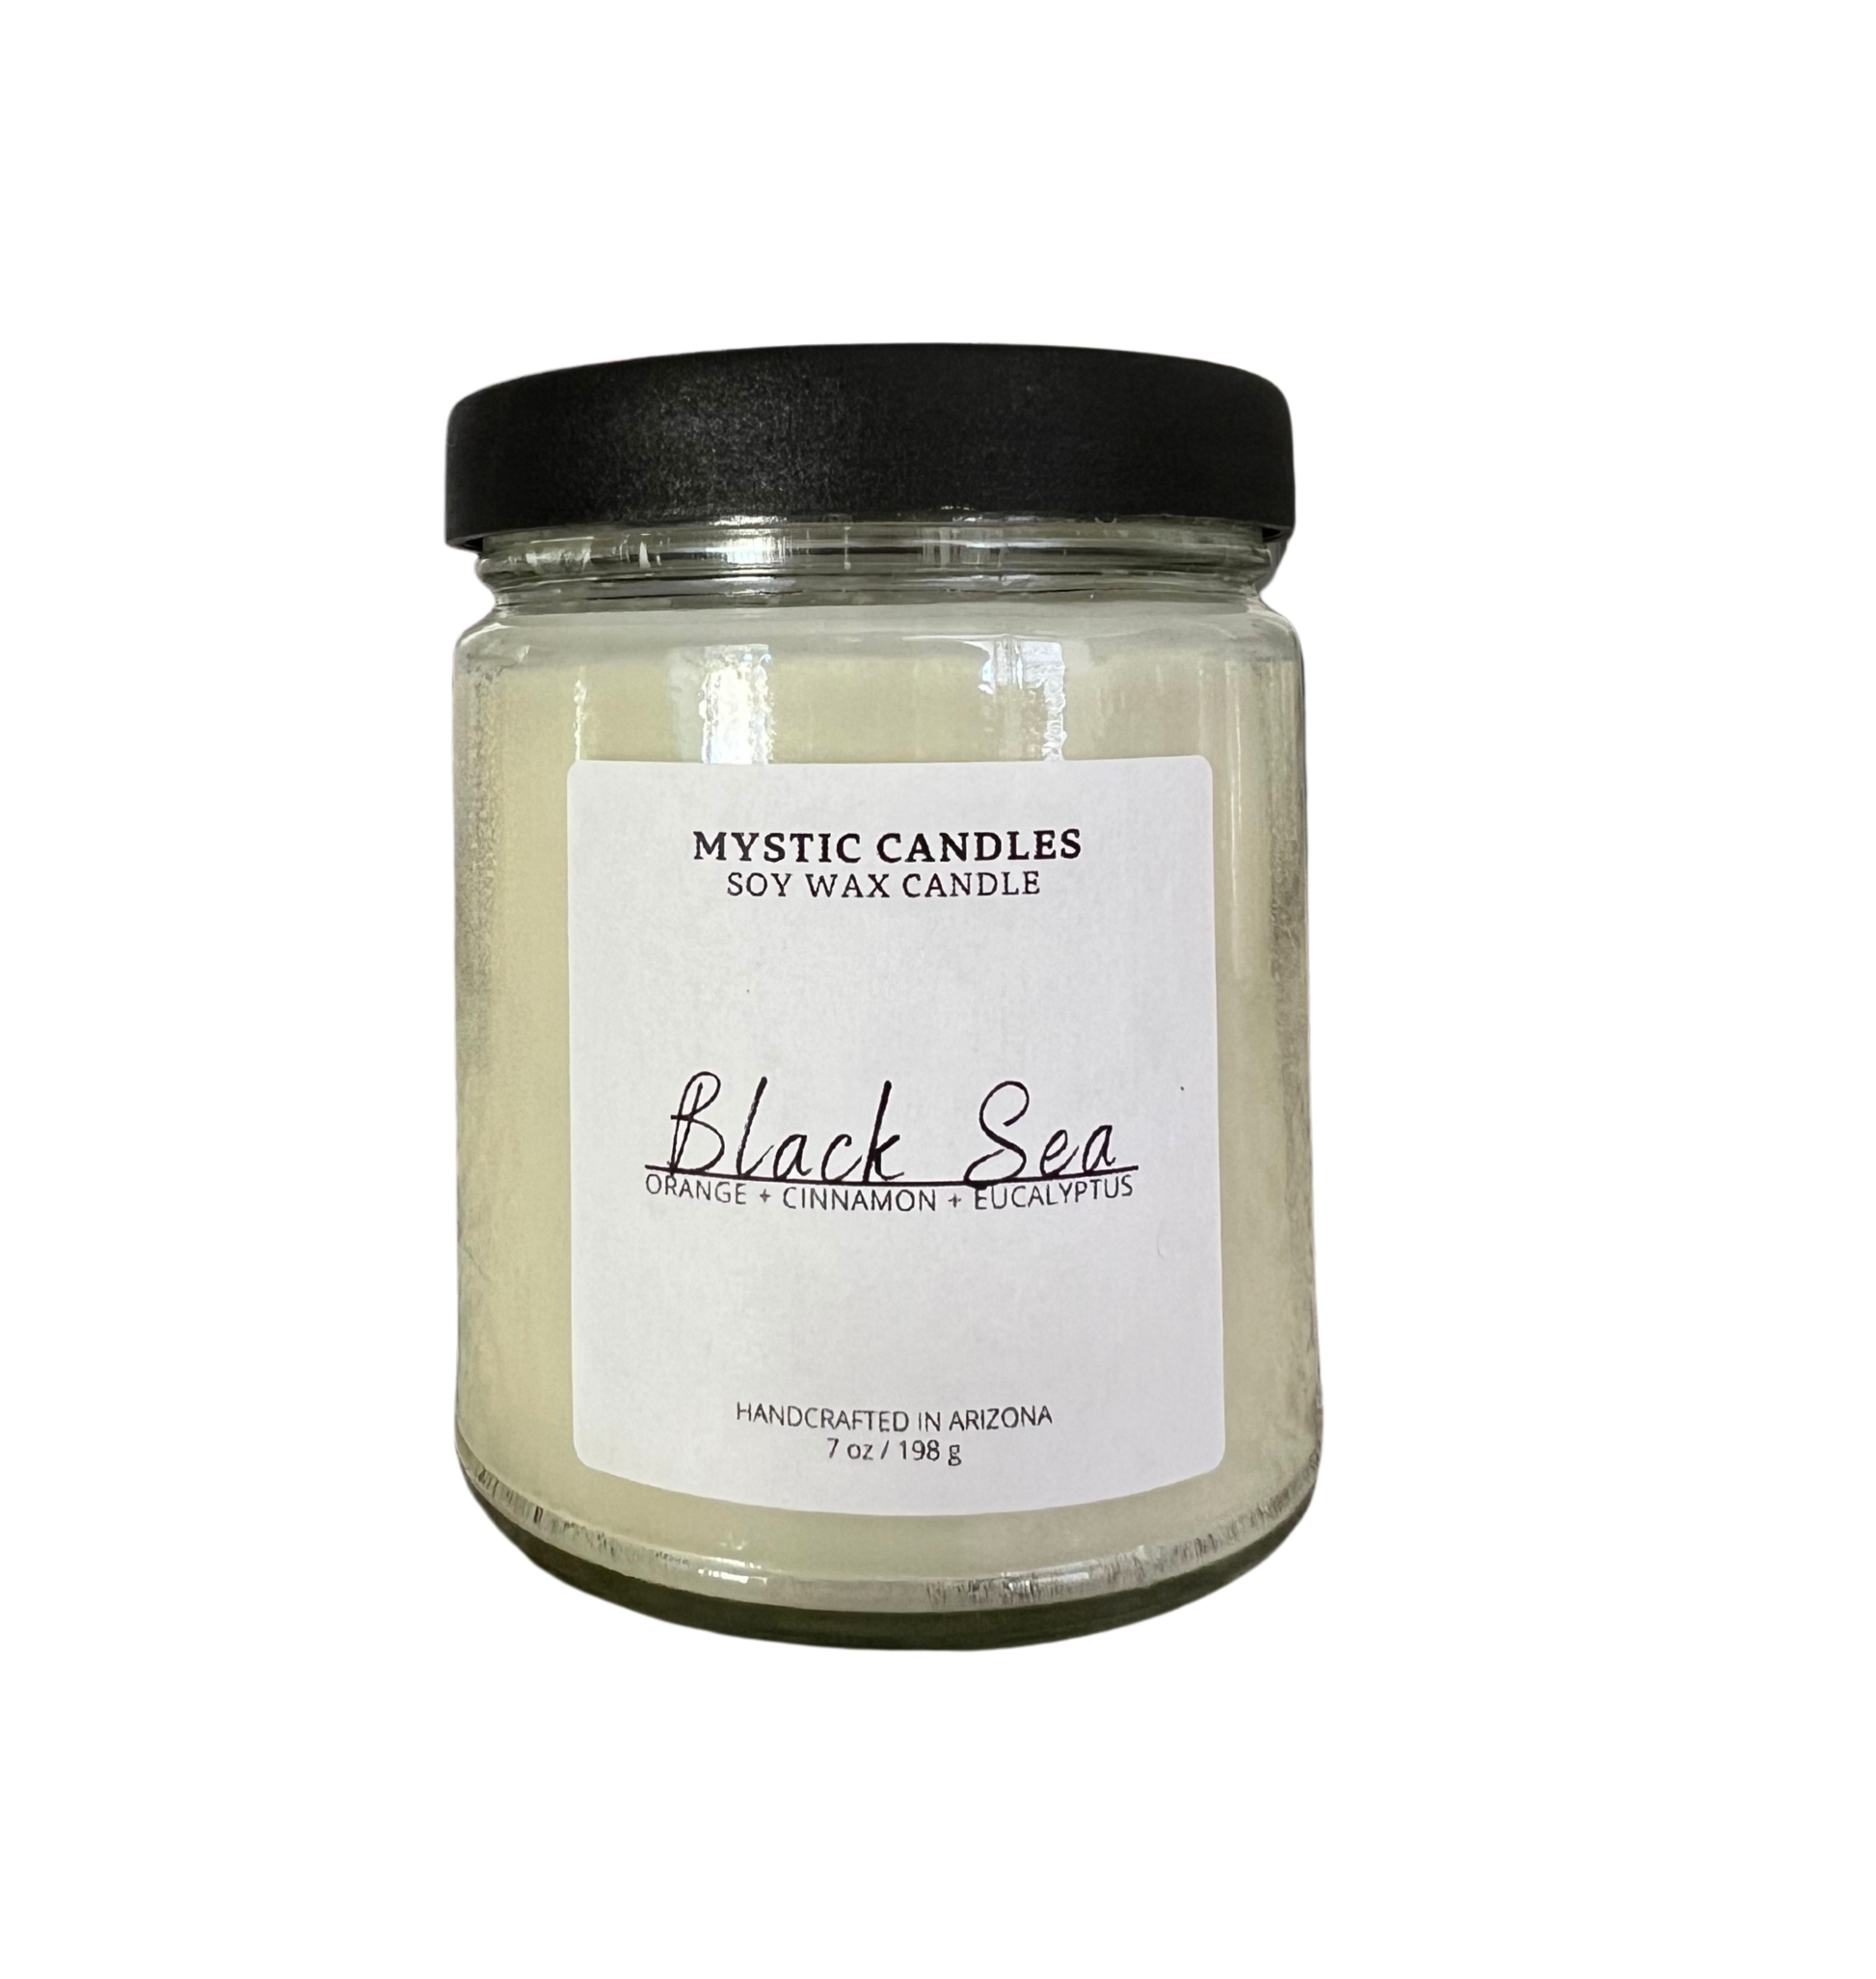 Black Sea Candle - Mystic Candles and Soaps LLC